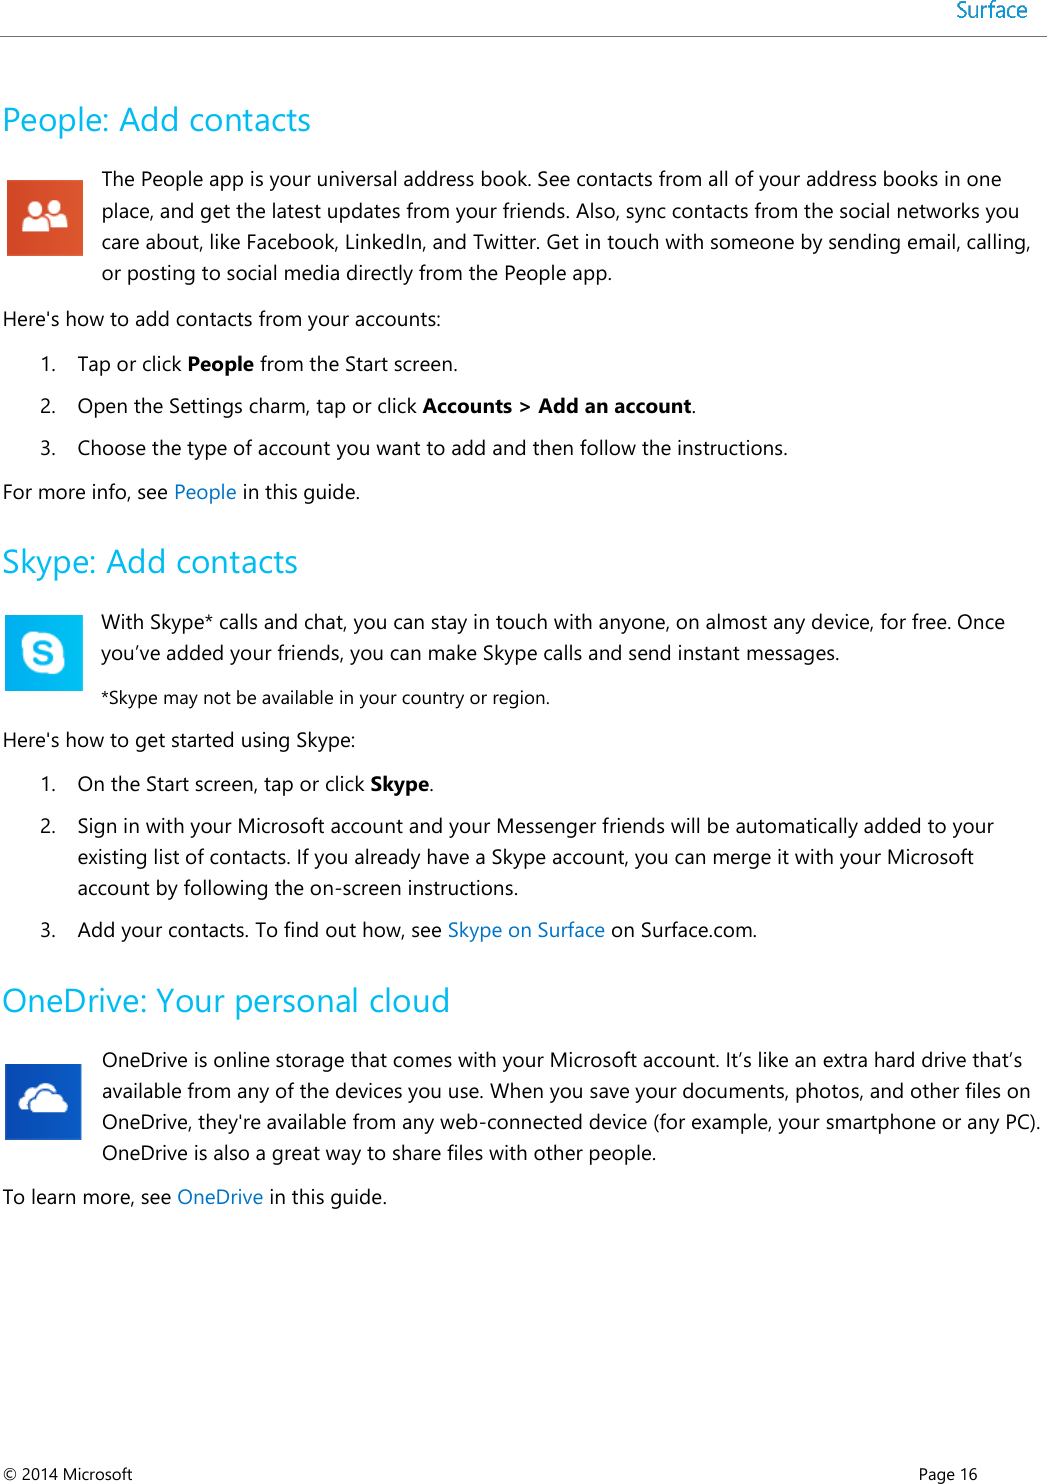  © 2014 Microsoft      Page 16  People: Add contacts  The People app is your universal address book. See contacts from all of your address books in one place, and get the latest updates from your friends. Also, sync contacts from the social networks you care about, like Facebook, LinkedIn, and Twitter. Get in touch with someone by sending email, calling, or posting to social media directly from the People app. Here&apos;s how to add contacts from your accounts: 1. Tap or click People from the Start screen.  2. Open the Settings charm, tap or click Accounts &gt; Add an account. 3. Choose the type of account you want to add and then follow the instructions.  For more info, see People in this guide. Skype: Add contacts With Skype* calls and chat, you can stay in touch with anyone, on almost any device, for free. Once you’ve added your friends, you can make Skype calls and send instant messages.  *Skype may not be available in your country or region. Here&apos;s how to get started using Skype: 1. On the Start screen, tap or click Skype. 2. Sign in with your Microsoft account and your Messenger friends will be automatically added to your existing list of contacts. If you already have a Skype account, you can merge it with your Microsoft account by following the on-screen instructions. 3. Add your contacts. To find out how, see Skype on Surface on Surface.com. OneDrive: Your personal cloud OneDrive is online storage that comes with your Microsoft account. It’s like an extra hard drive that’s available from any of the devices you use. When you save your documents, photos, and other files on OneDrive, they&apos;re available from any web-connected device (for example, your smartphone or any PC). OneDrive is also a great way to share files with other people.  To learn more, see OneDrive in this guide.     